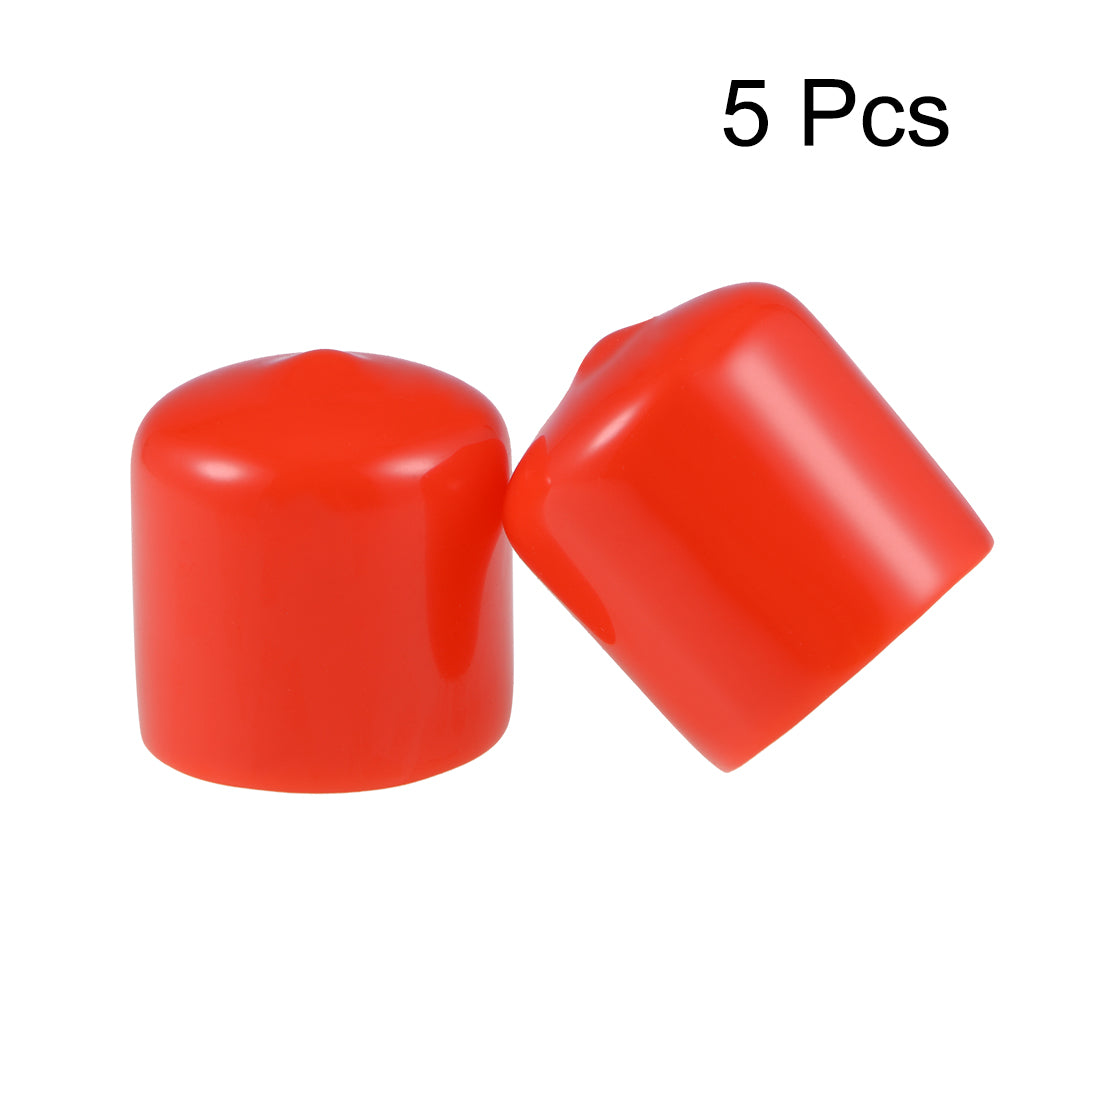 uxcell Uxcell Screw Thread Protector, 23mm ID Round End Cap Cover Red Tube Caps 5pcs